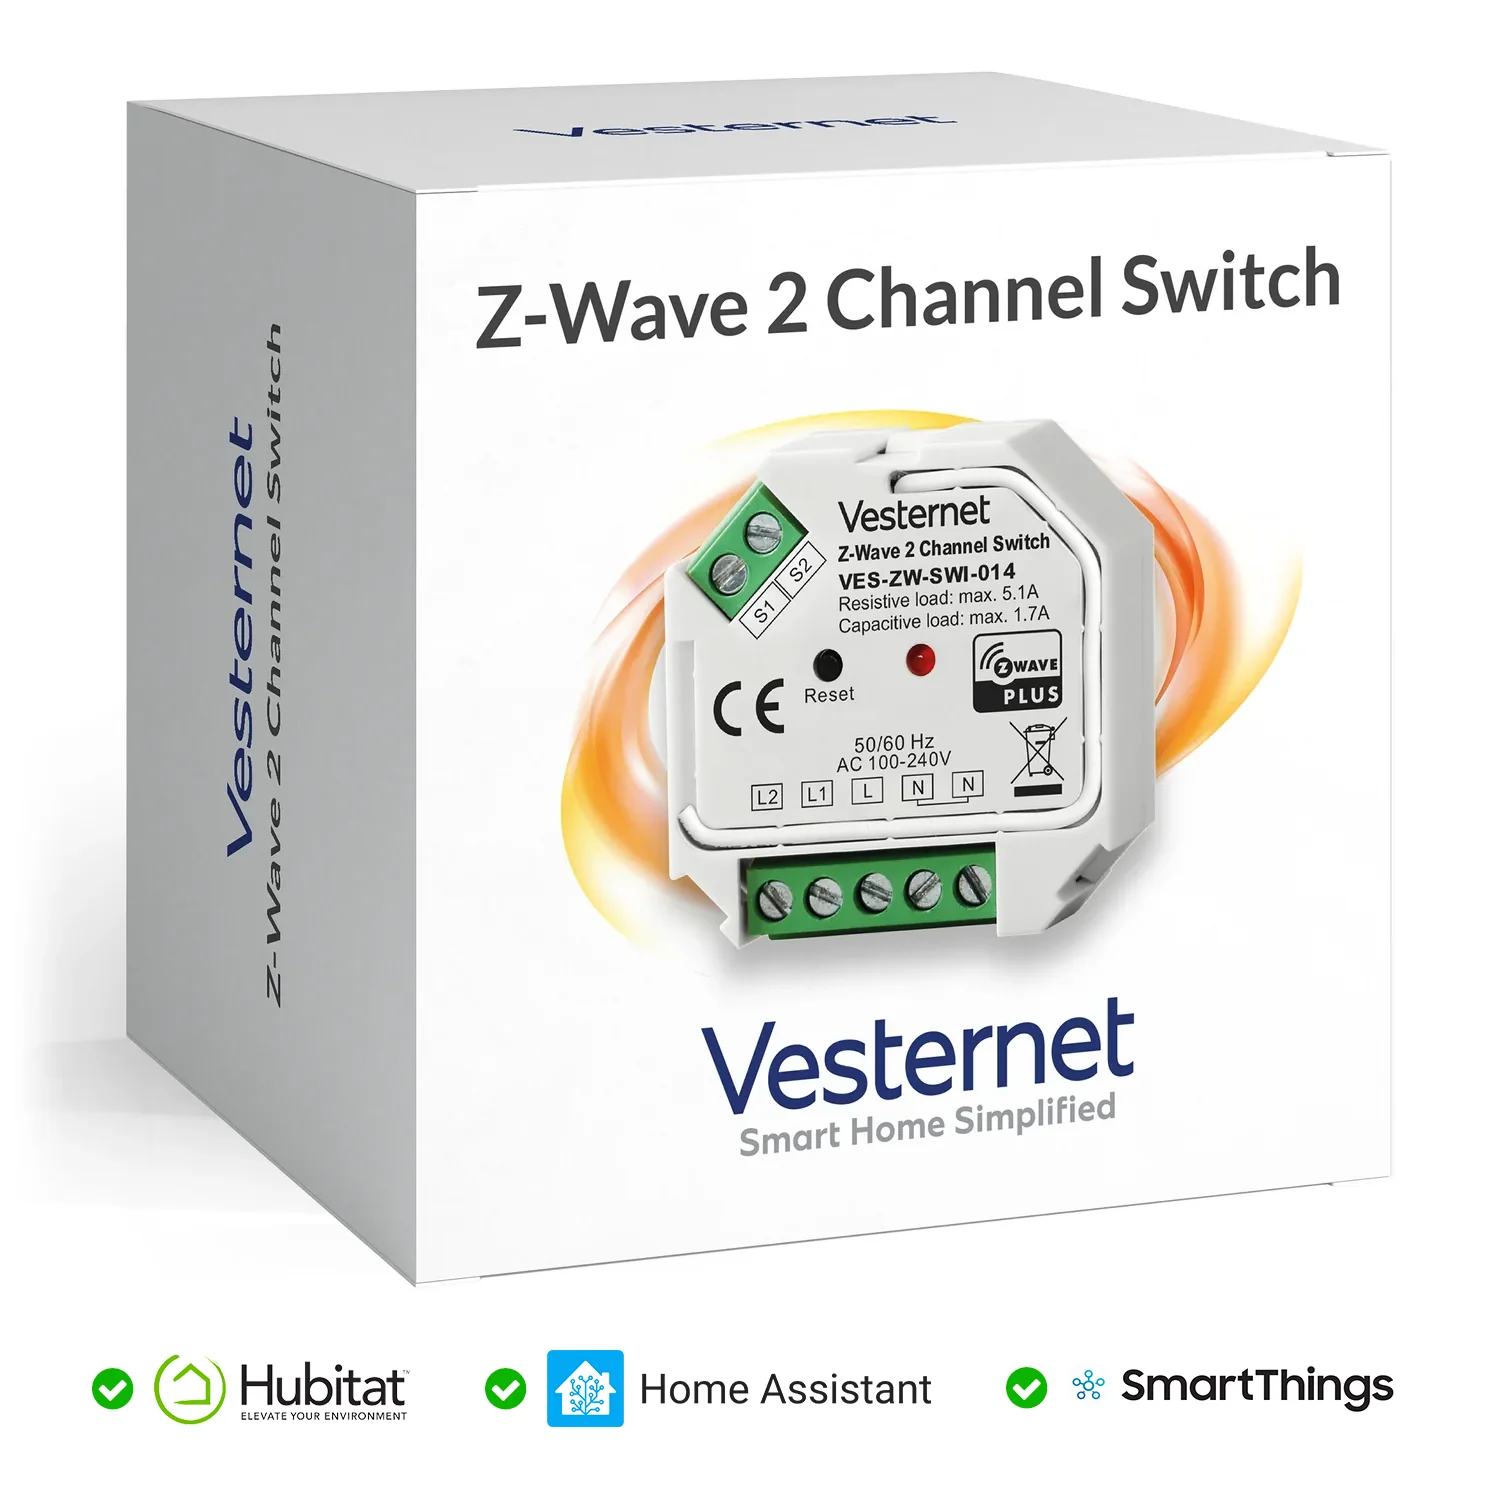 Vesternet Z-Wave 2 Channel Switch Questions & Answers